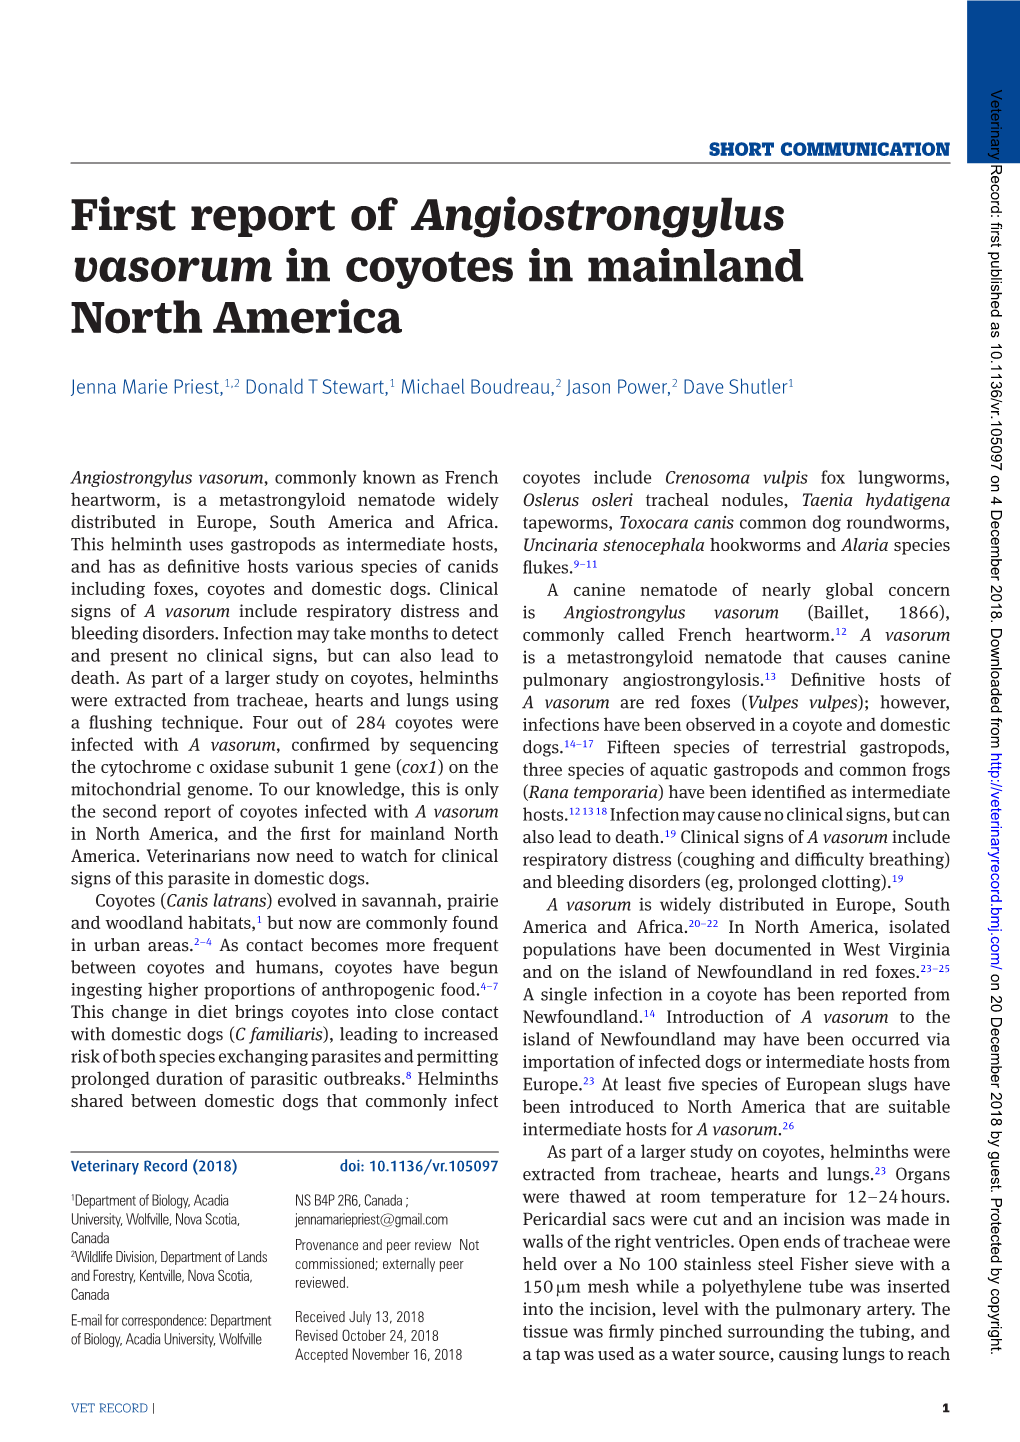 First Report of Angiostrongylus Vasorum in Coyotes in Mainland North America